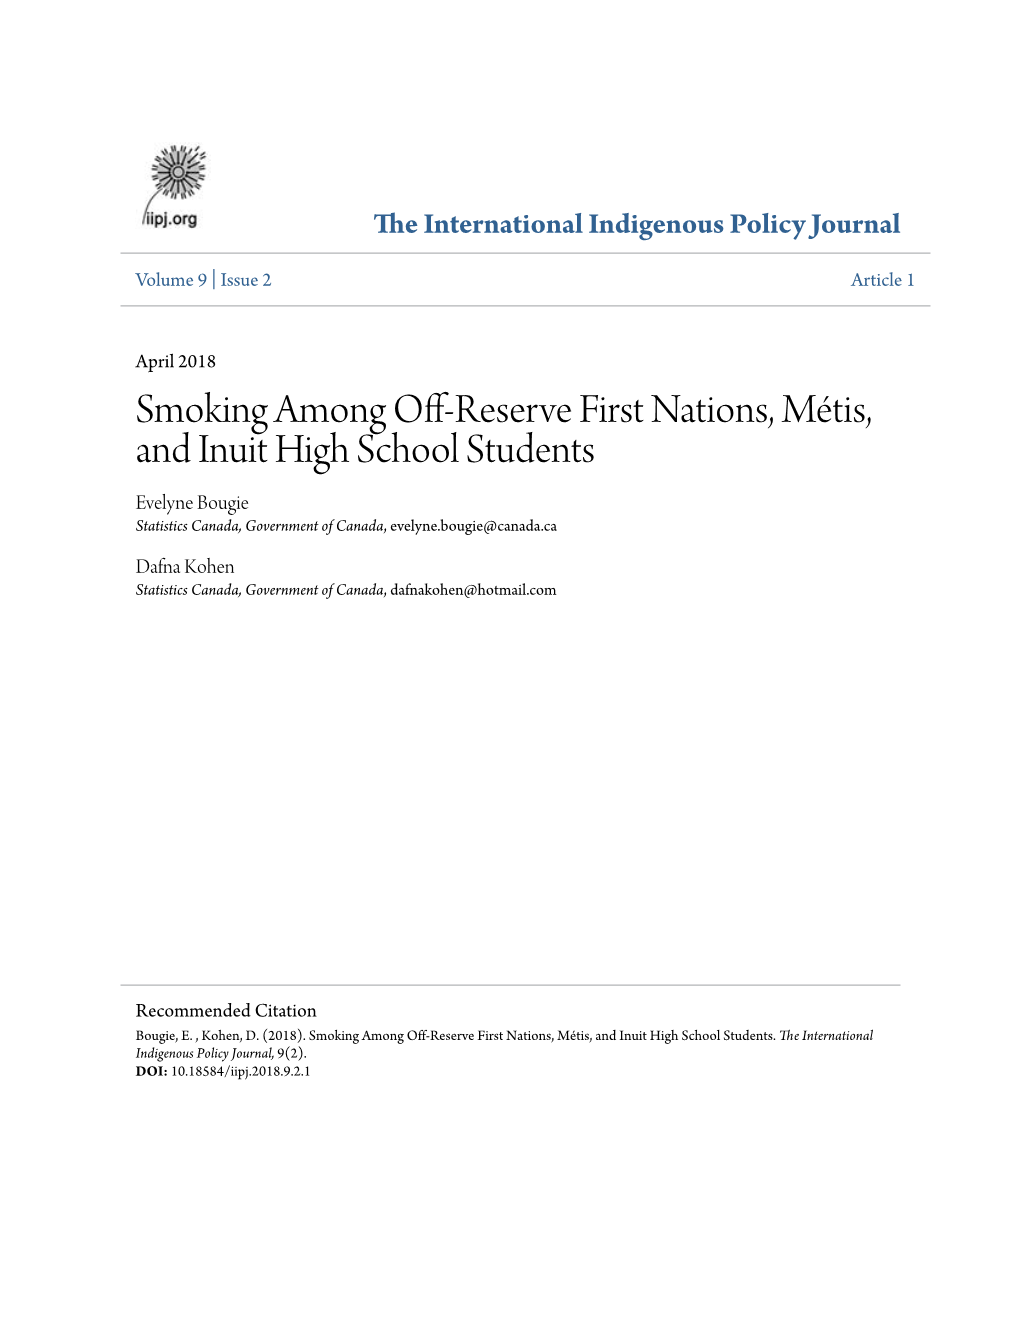 Smoking Among Off-Reserve First Nations, Métis, and Inuit High School Students Evelyne Bougie Statistics Canada, Government of Canada, Evelyne.Bougie@Canada.Ca